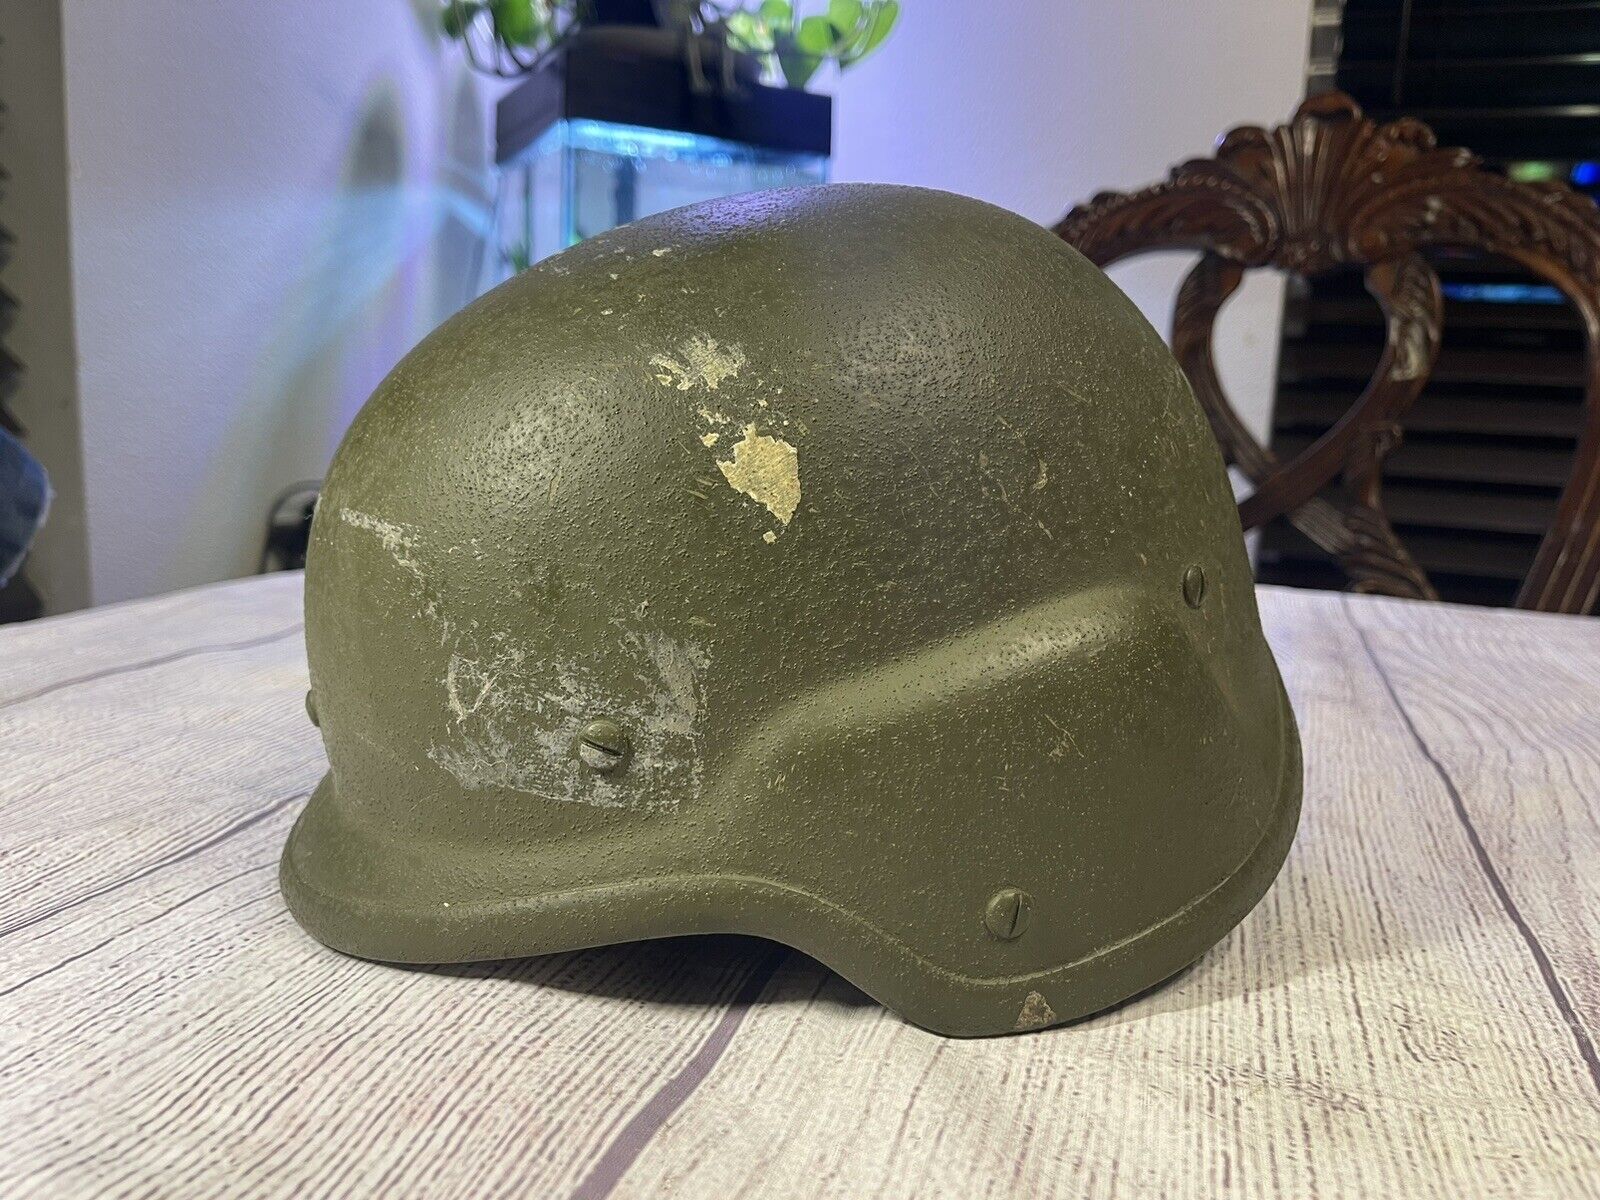 US Army PASGT Ballistic Military Helmet Made Size M-2